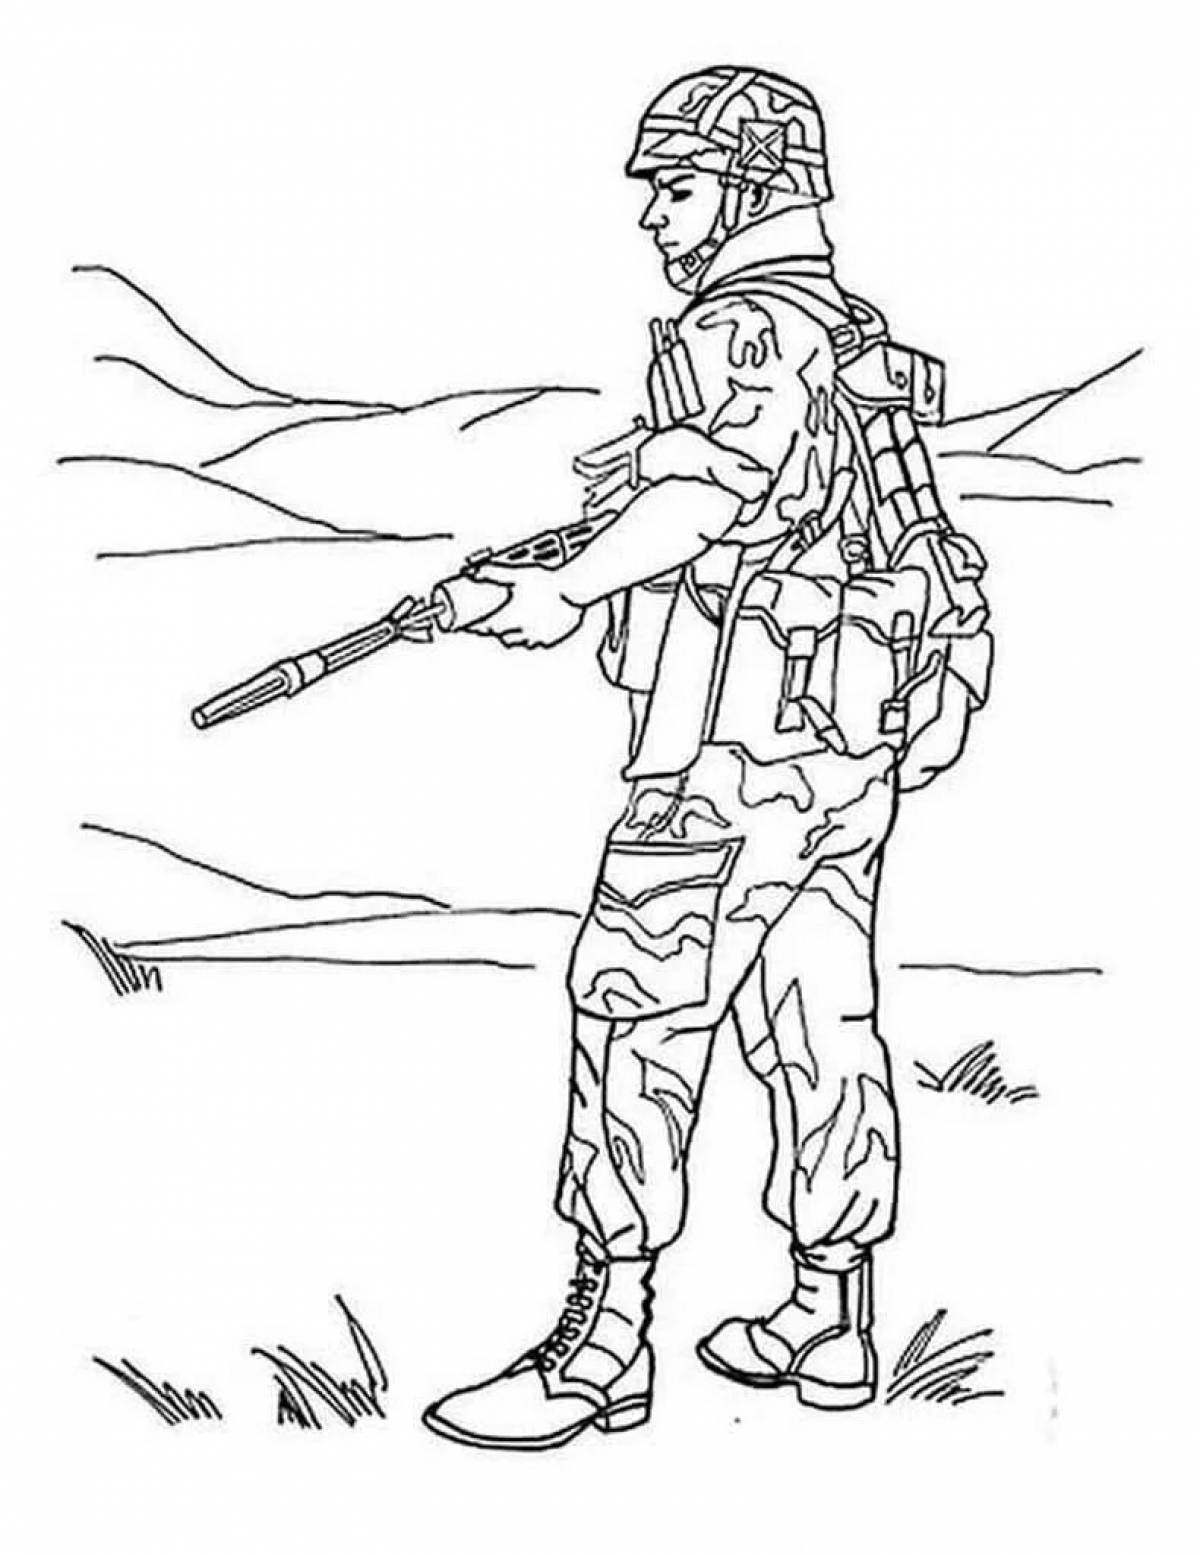 Coloring book of an outstanding Russian soldier for children